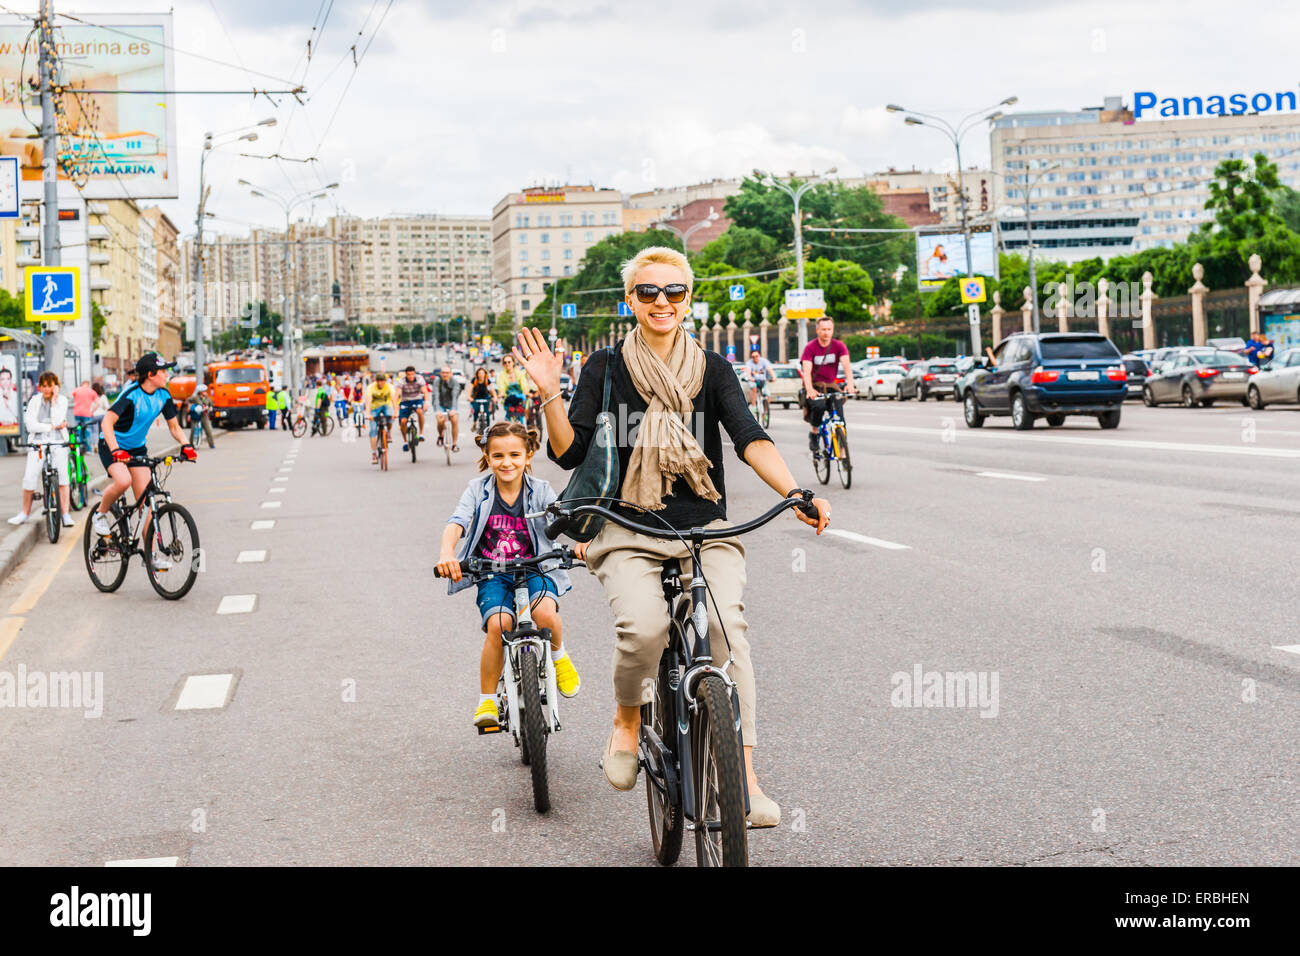 Moscow, Russia, Sunday, May 31st, 2015. 5th annual Moscow Bike Parade. The parade was organized by the Let's Bike It! project to promote the development of the bicycle infrastructure and road traffic safety in the city. Hello! Credit:  Alex's Pictures/Alamy Live News Stock Photo